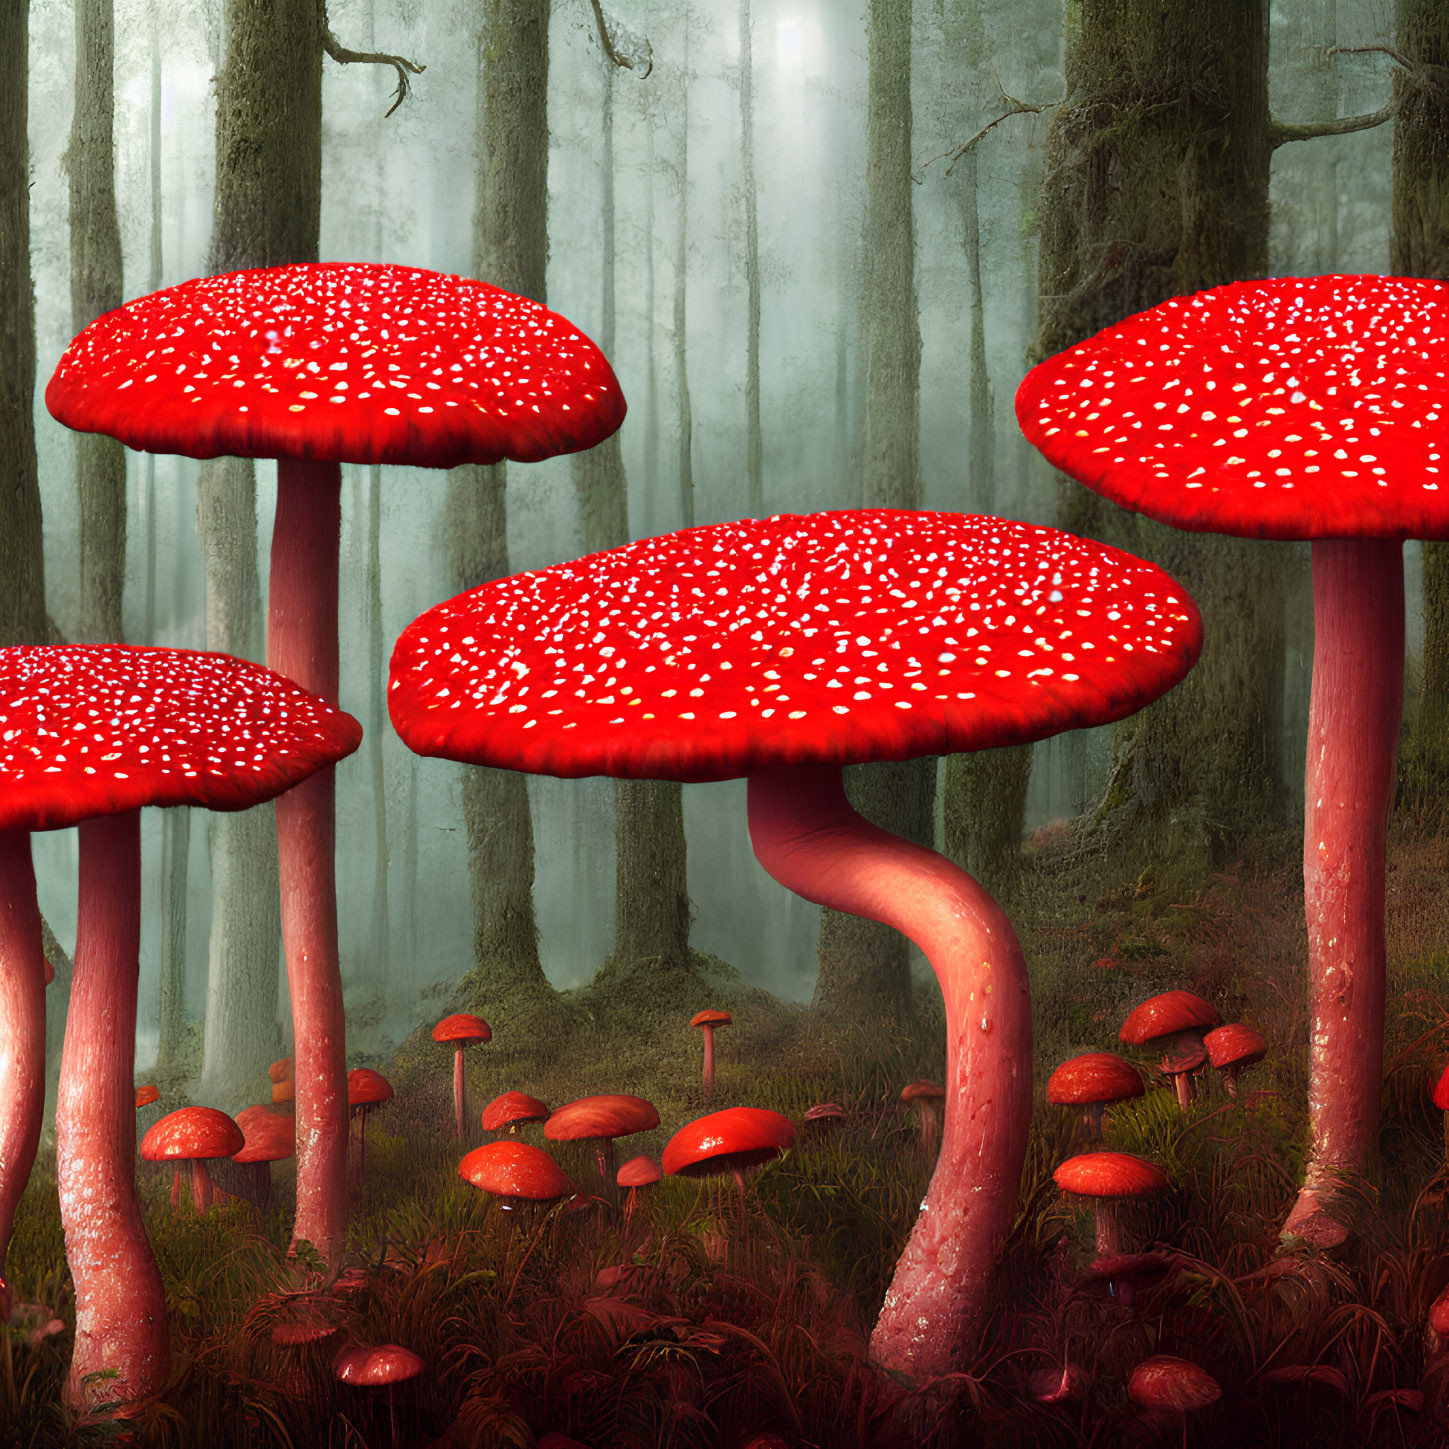 Enchanted forest scene with red-capped mushrooms